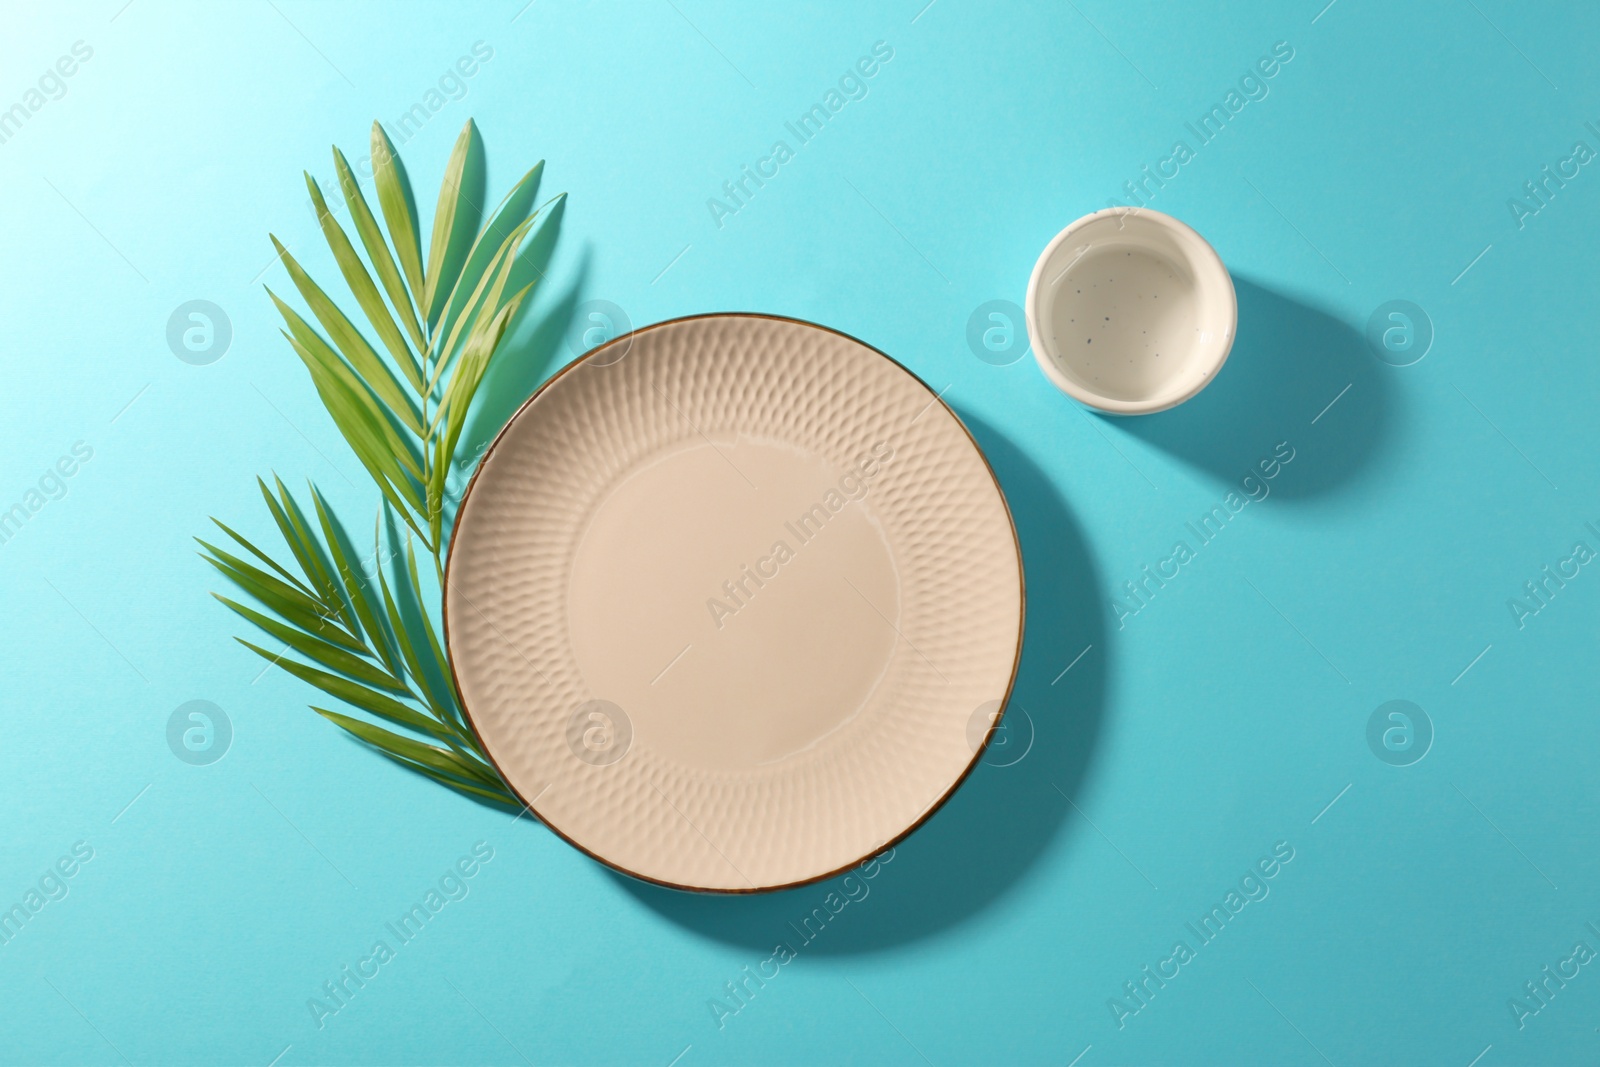 Photo of Ceramic plate, bowl and green leaves on turquoise background, flat lay